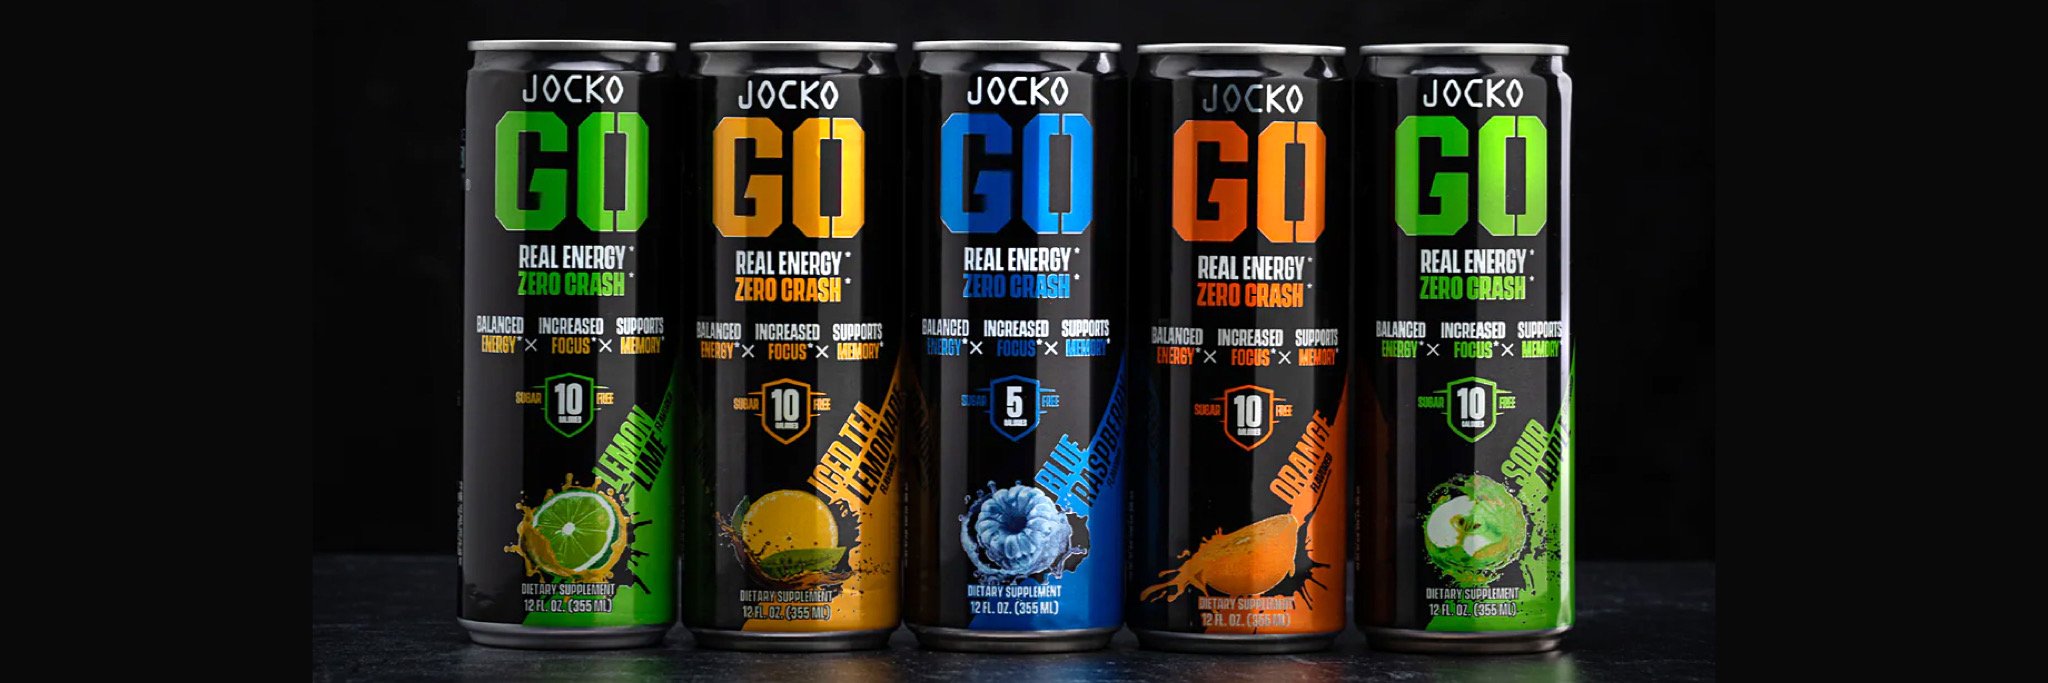     www.JockoFuel.com       Mountain Side listeners receive     &nbsp;      10% off     &nbsp;all Jocko Fuel products! Use Code&nbsp;     TMS10     &nbsp;to save.   